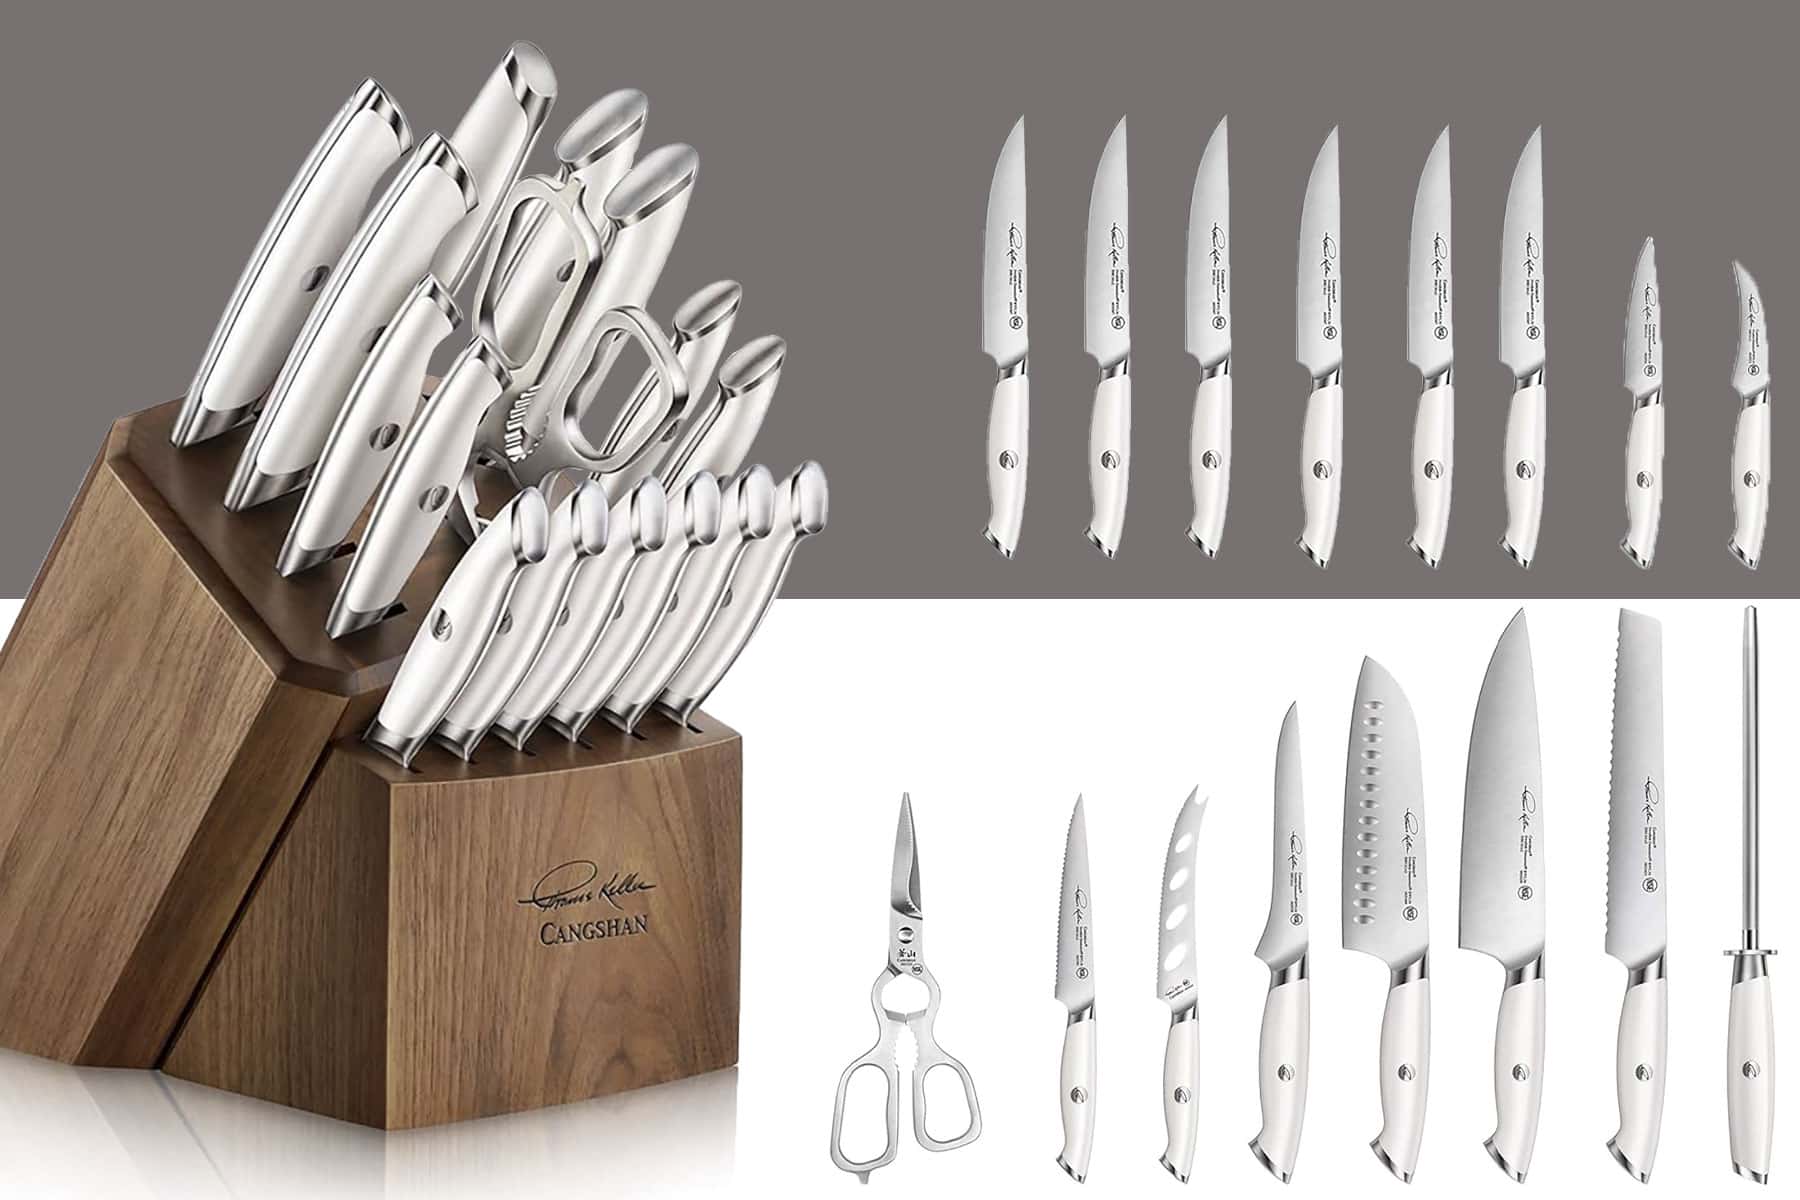 The Cangshan Thomas Keller 17-piece knife set shown with the knives in the storage block and outside of the storage block on a white and gray background.